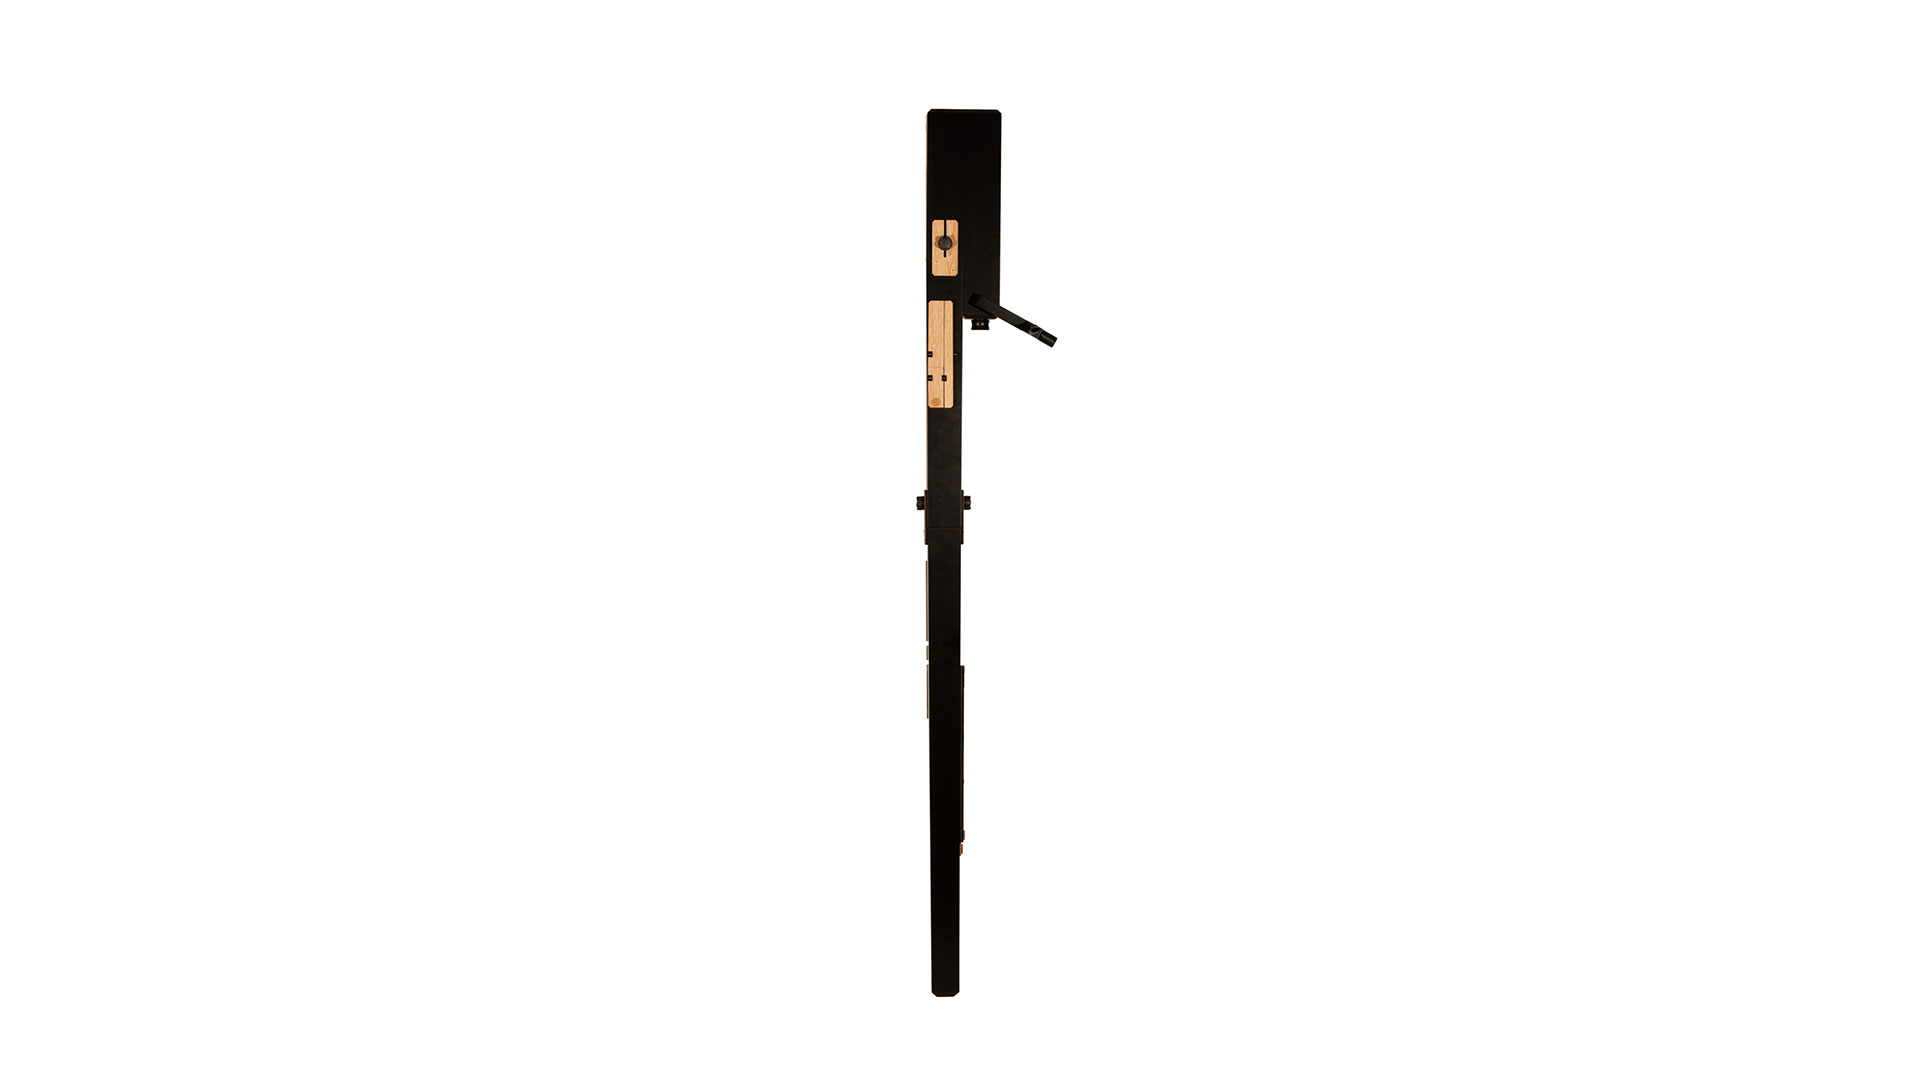 Paetzold by Kunath, "Solo", "HP Original" sub great bass recorder in c, 442 Hz, RESONA synthetic material